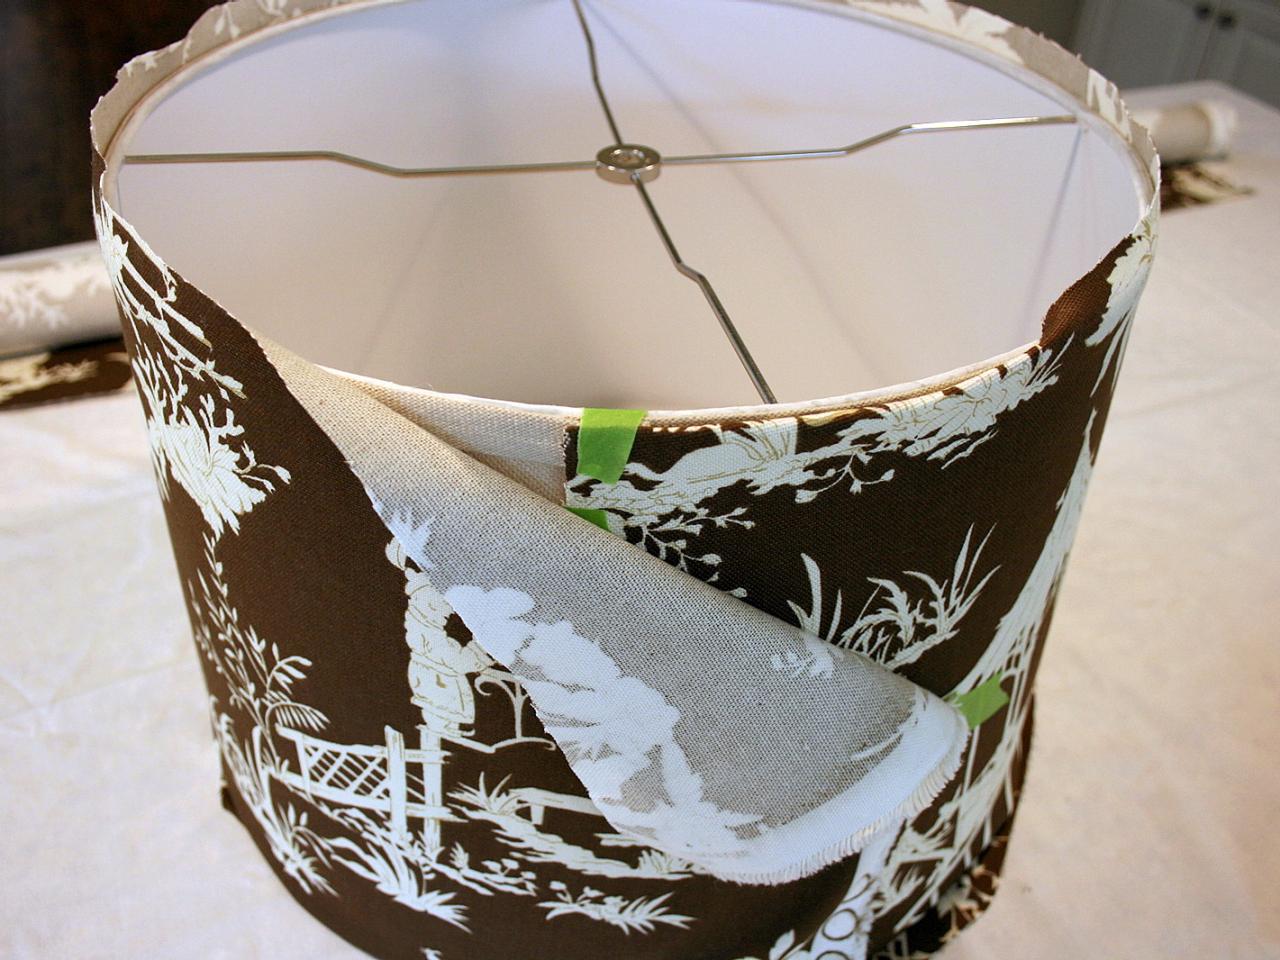 Custom Fabric Covered Lampshade, How To Make A Fabric Lined Lampshade